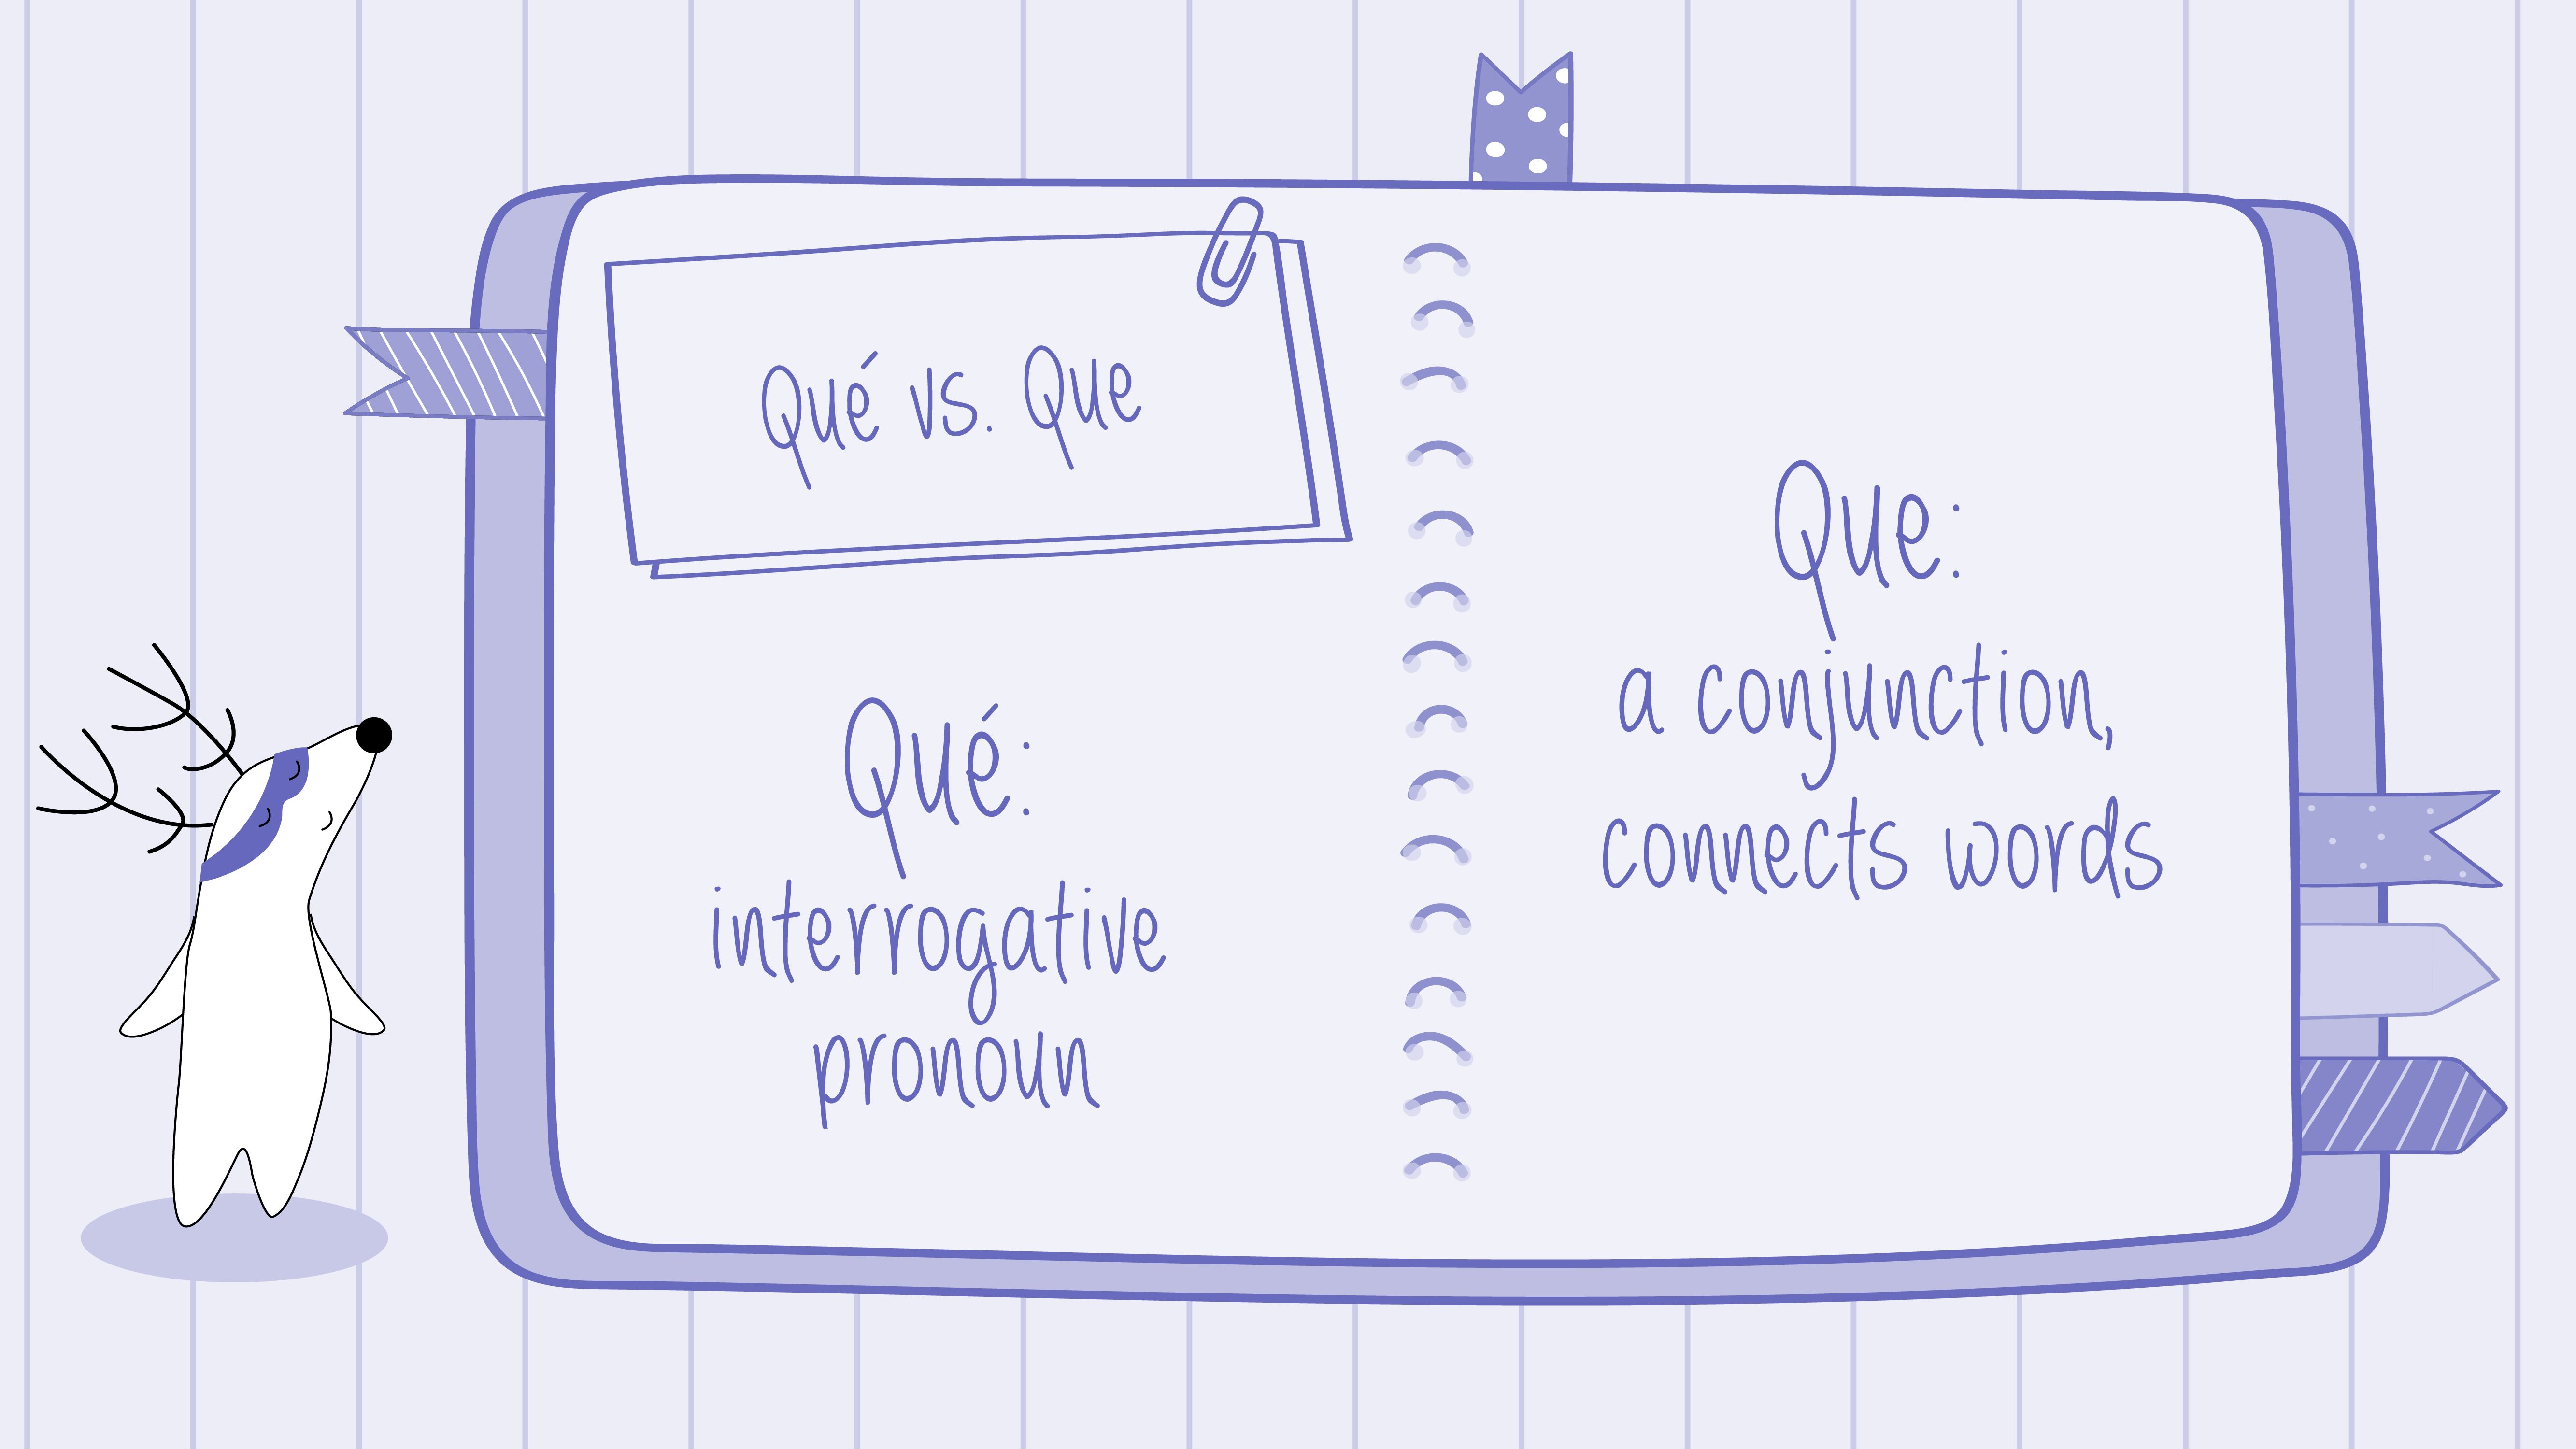 A picture of a notebook page with annotations that says: “Qué — an interrogative pronoun, Que — a conjunction, connects words.“